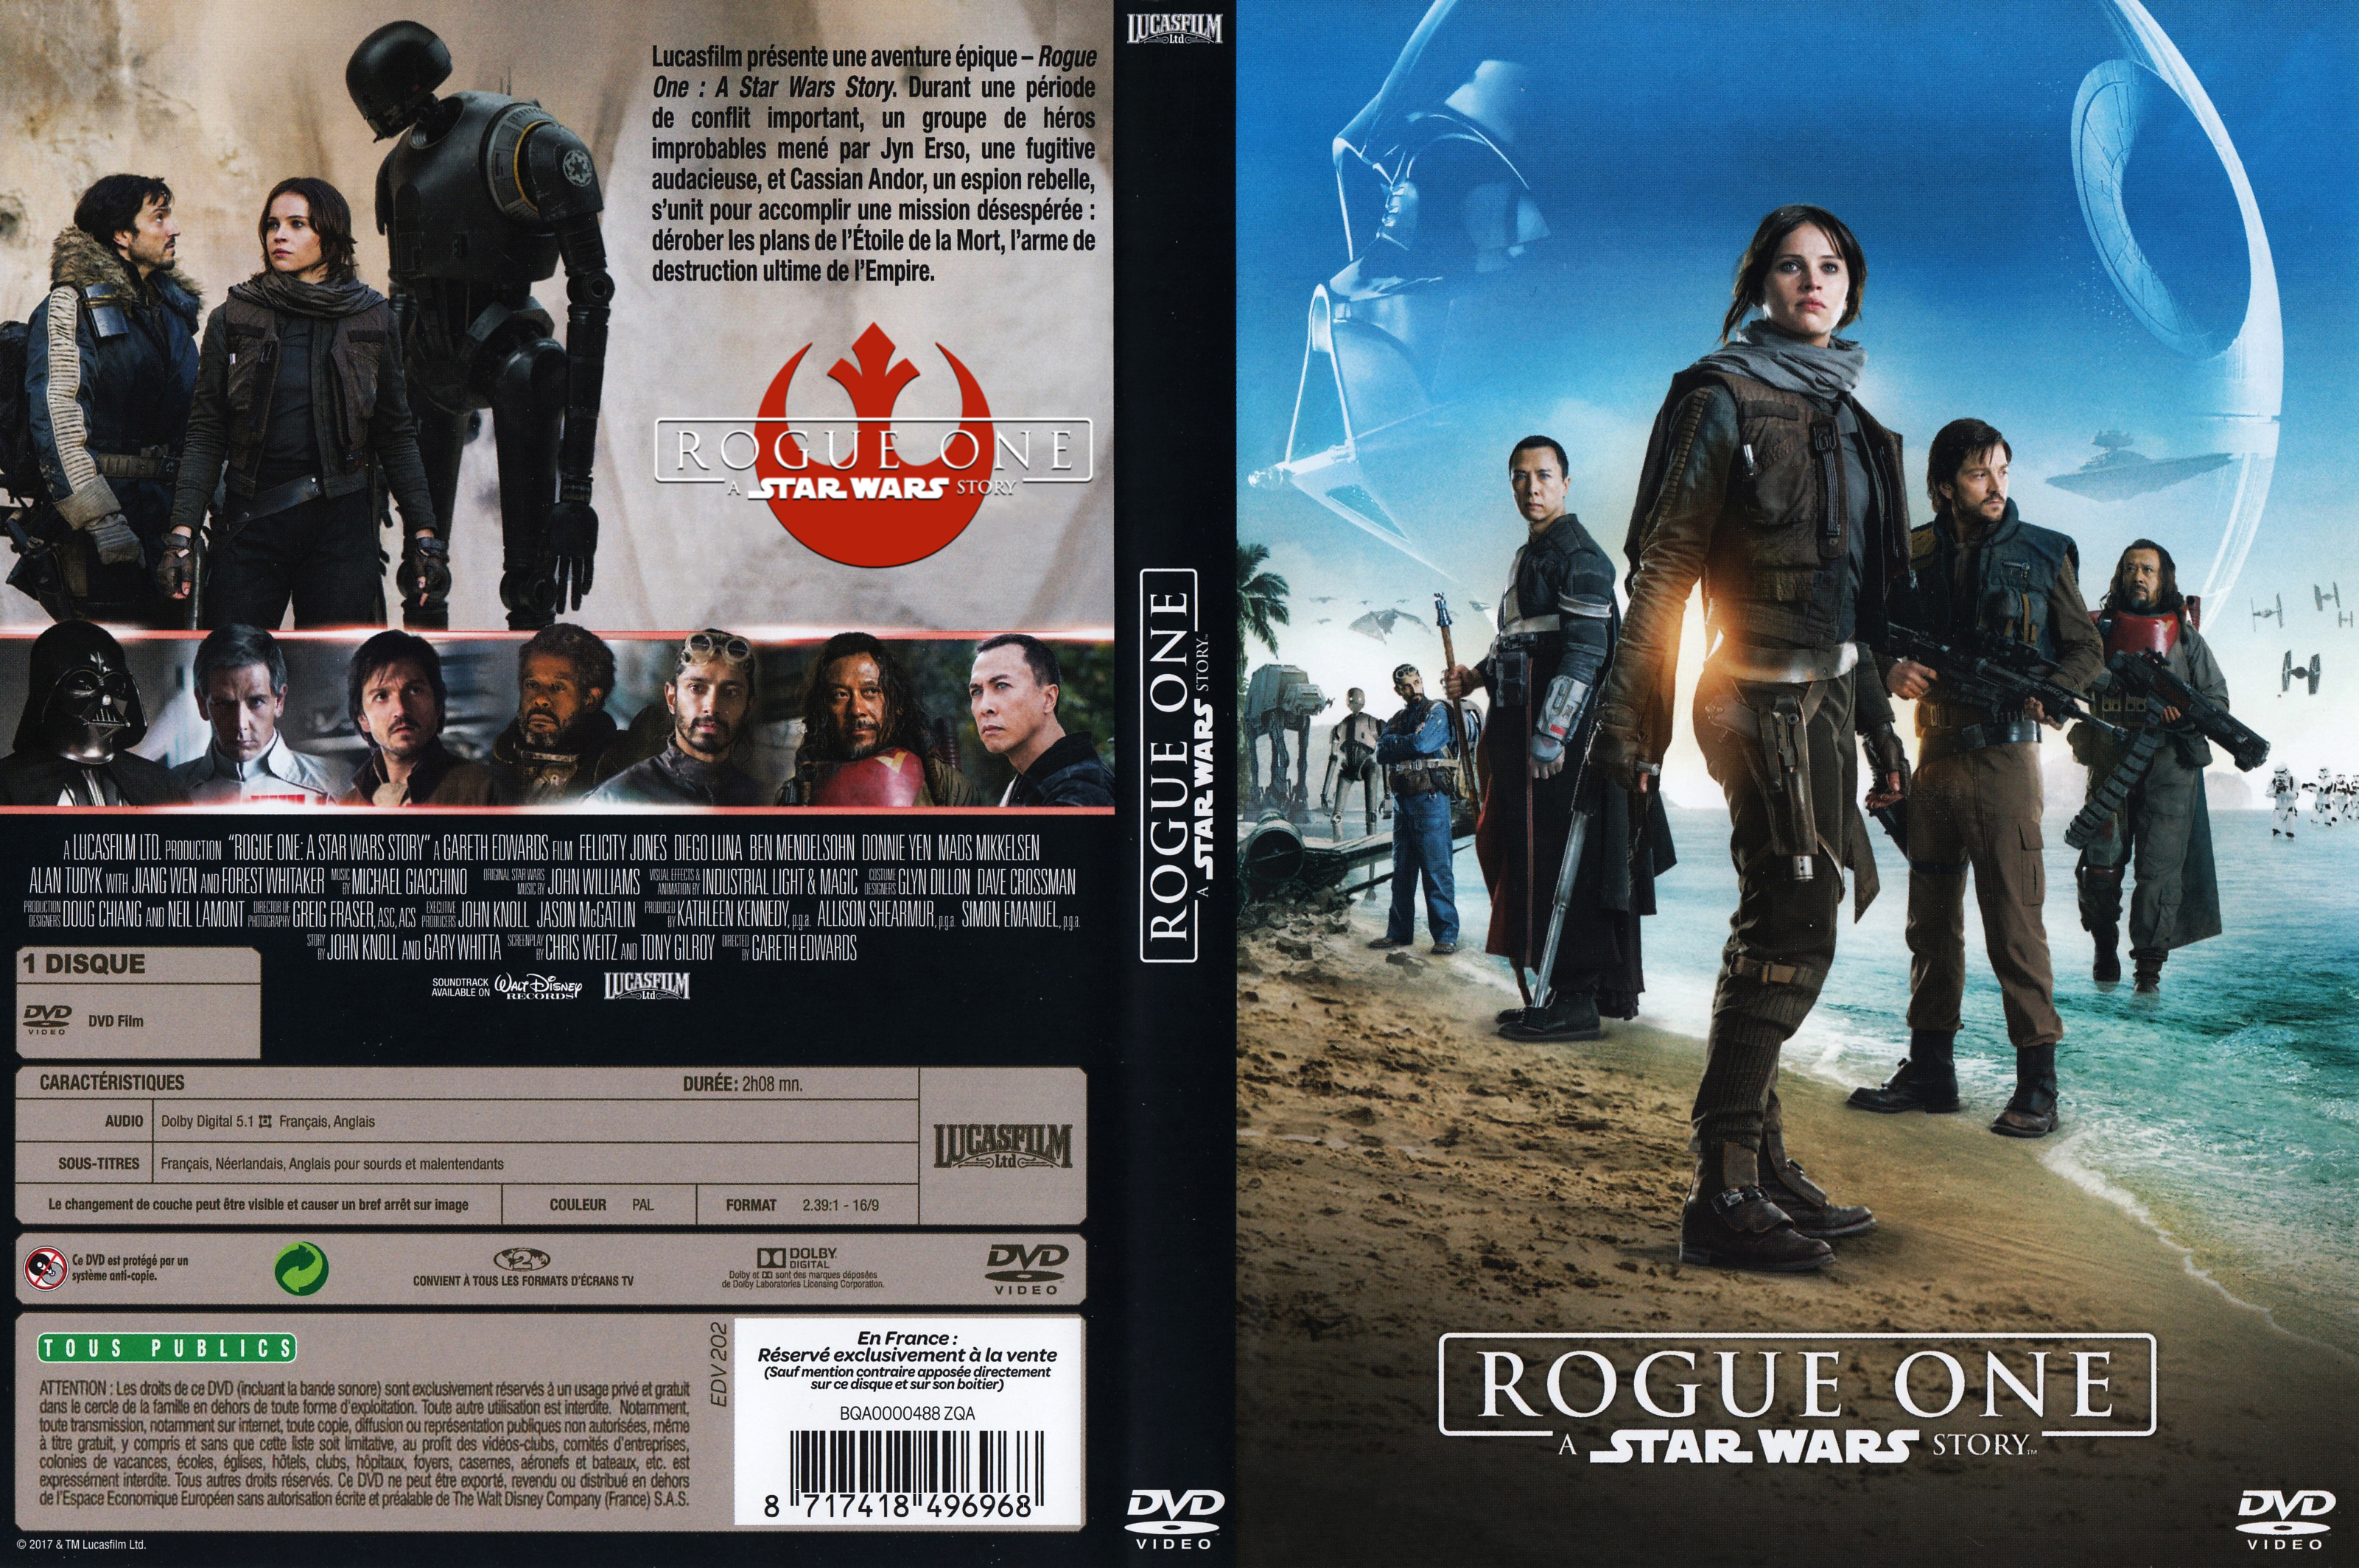 Jaquette DVD Rogue One: A Star Wars Story custom v3